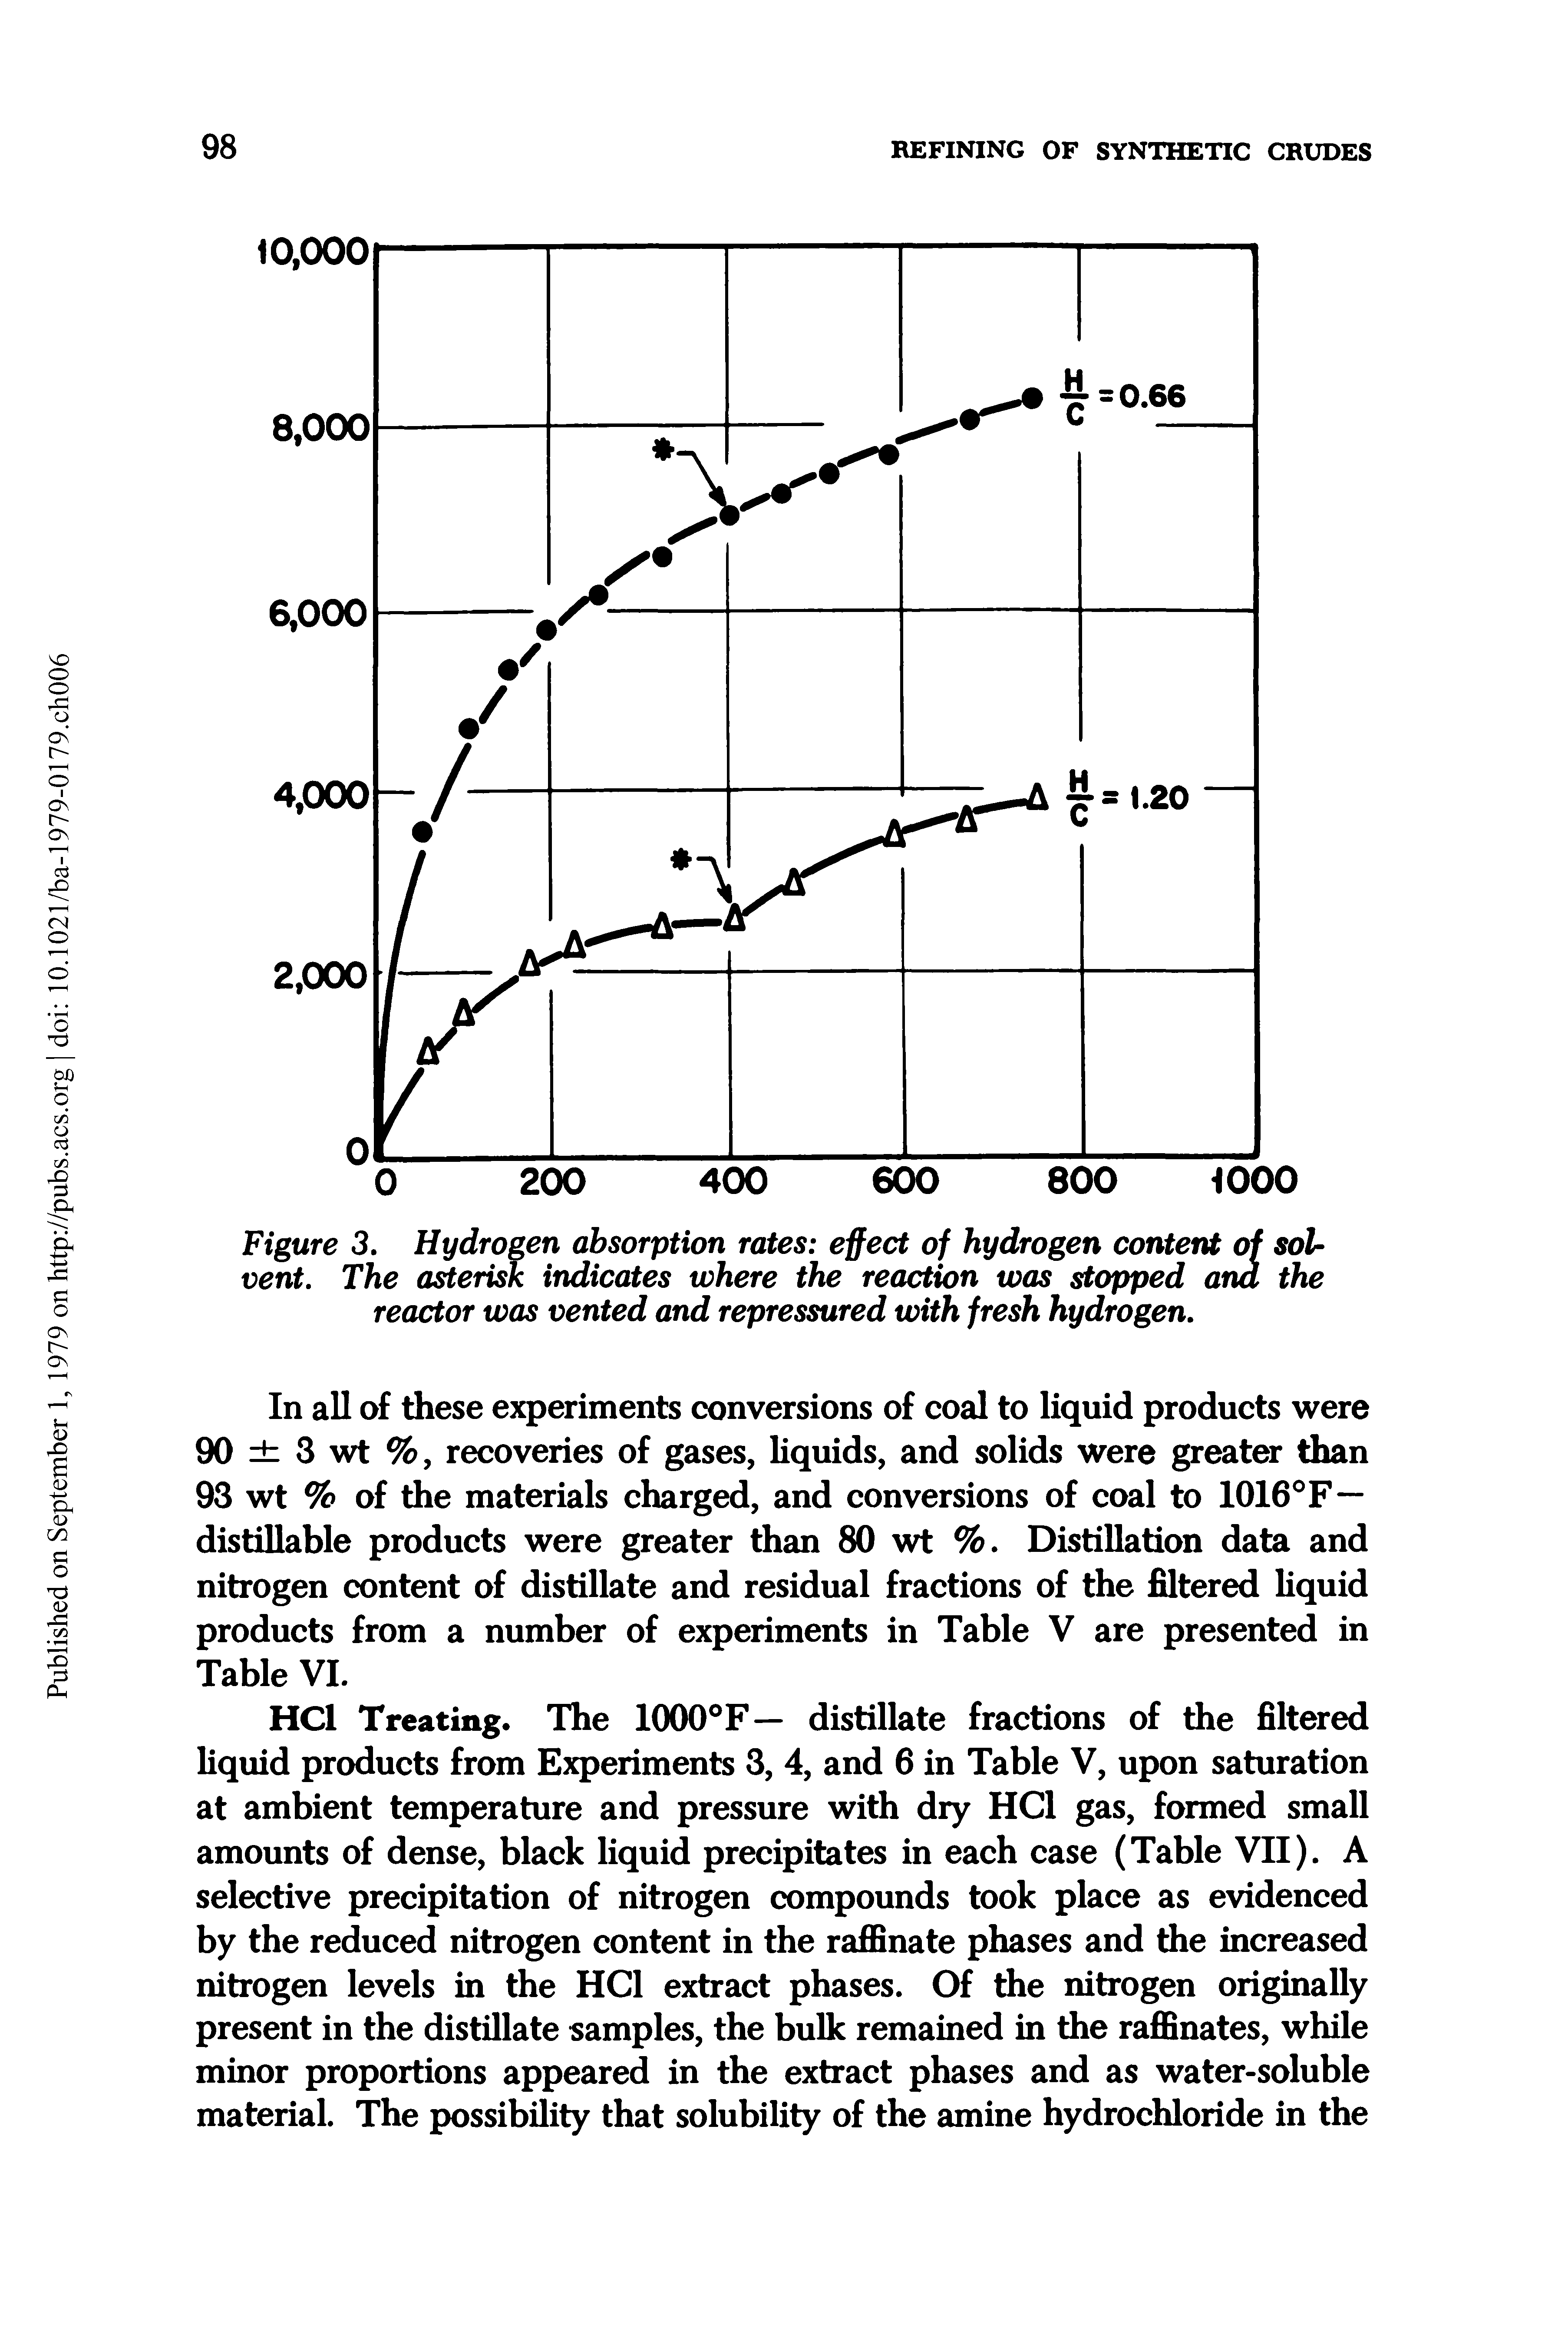 Figure 3. Hydrogen absorption rates effect of hydrogen content of solvent. The asterisk indicates where the reaction was stopped and the reactor was vented and repressured with fresh hydrogen.